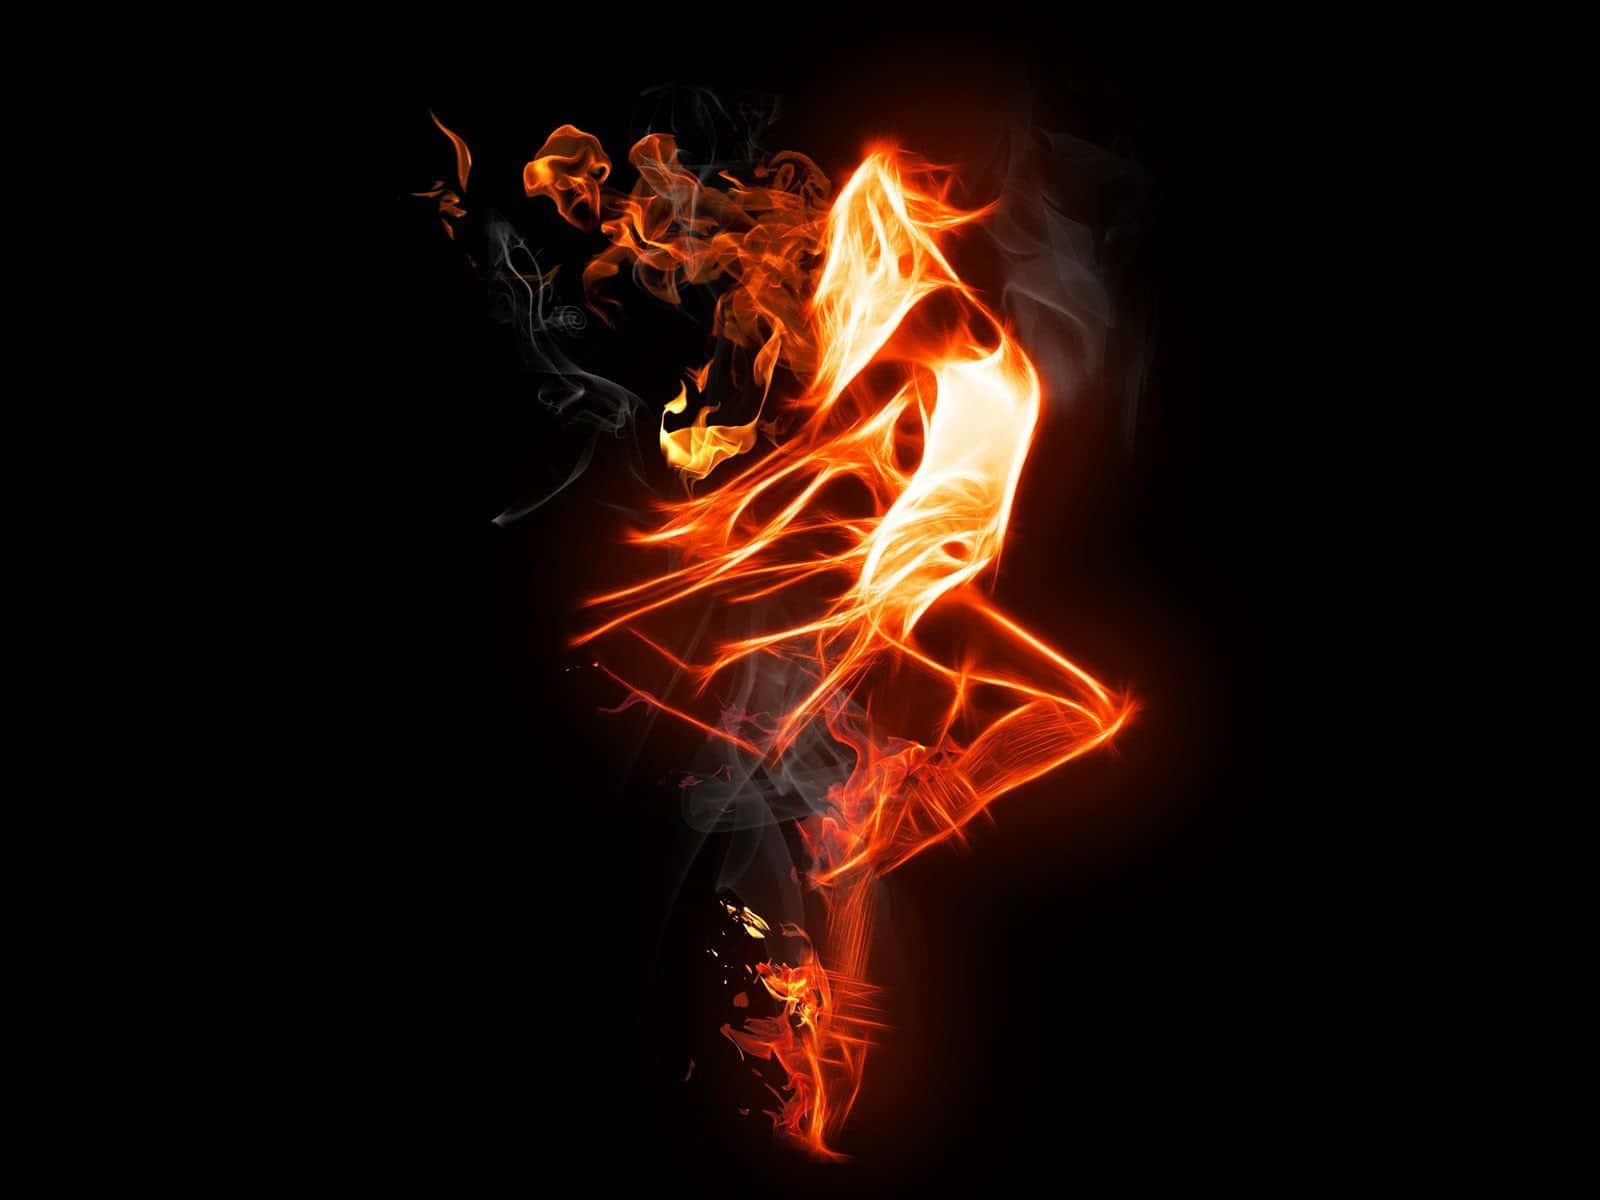 Captivating Dance of Fire